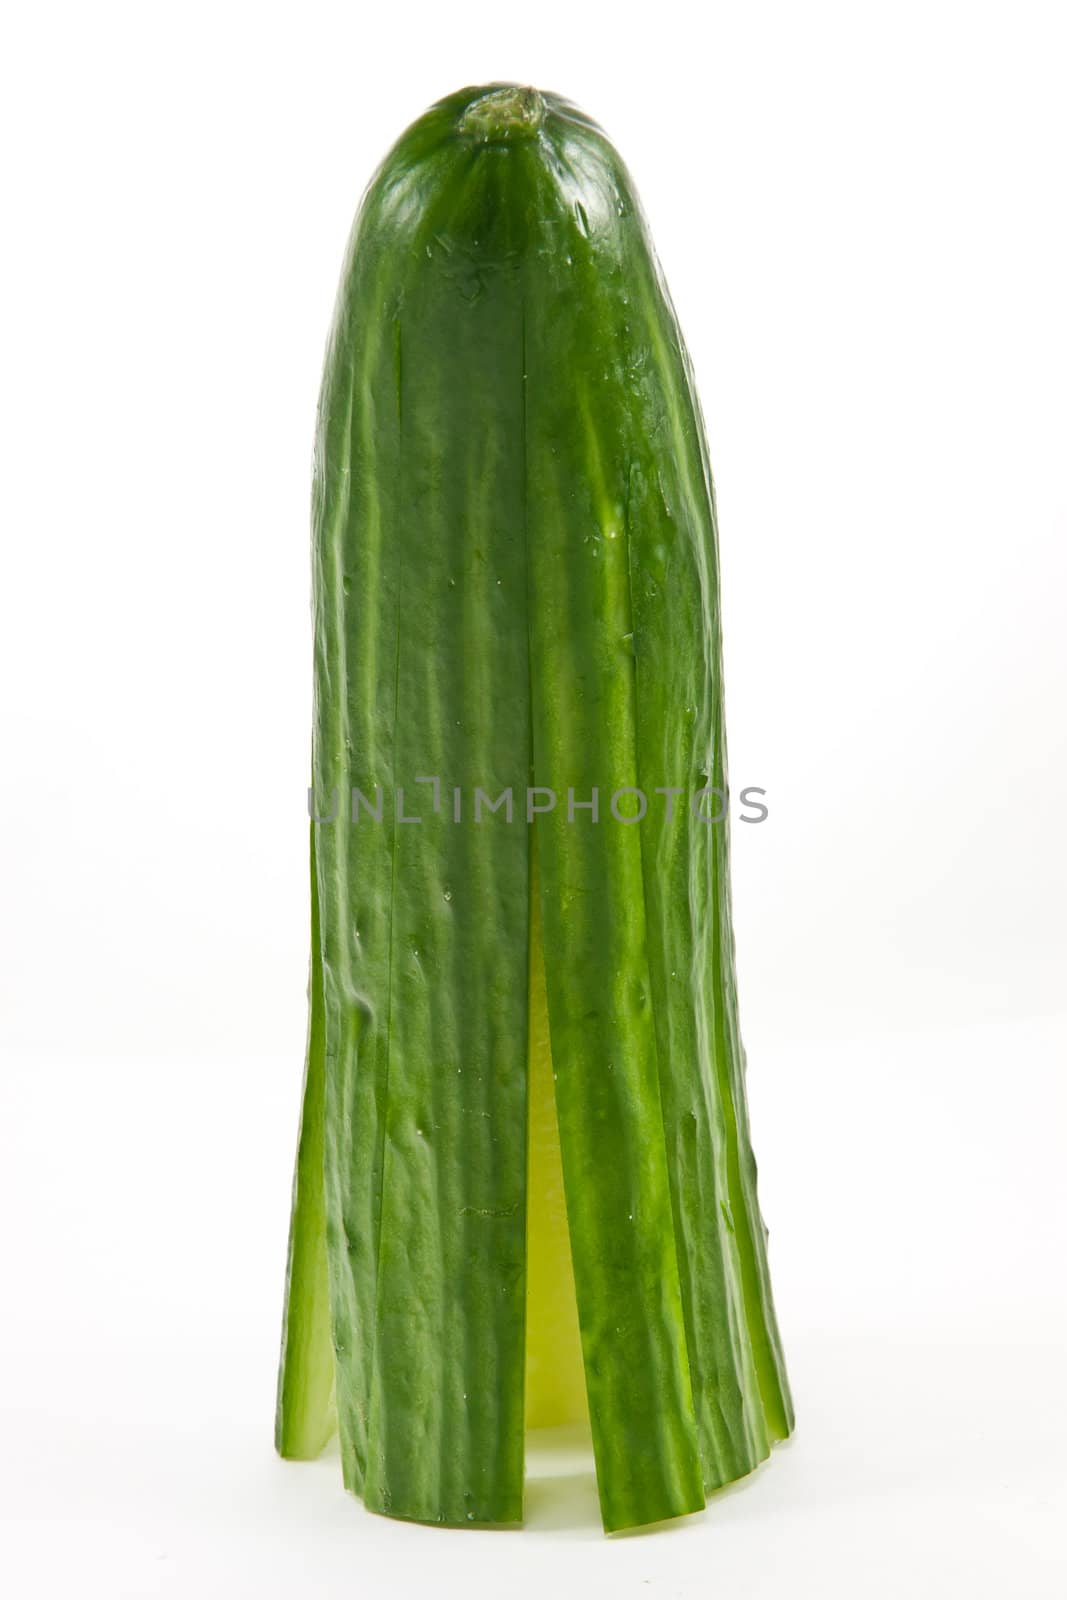 Picture of a standing sliced cucumber